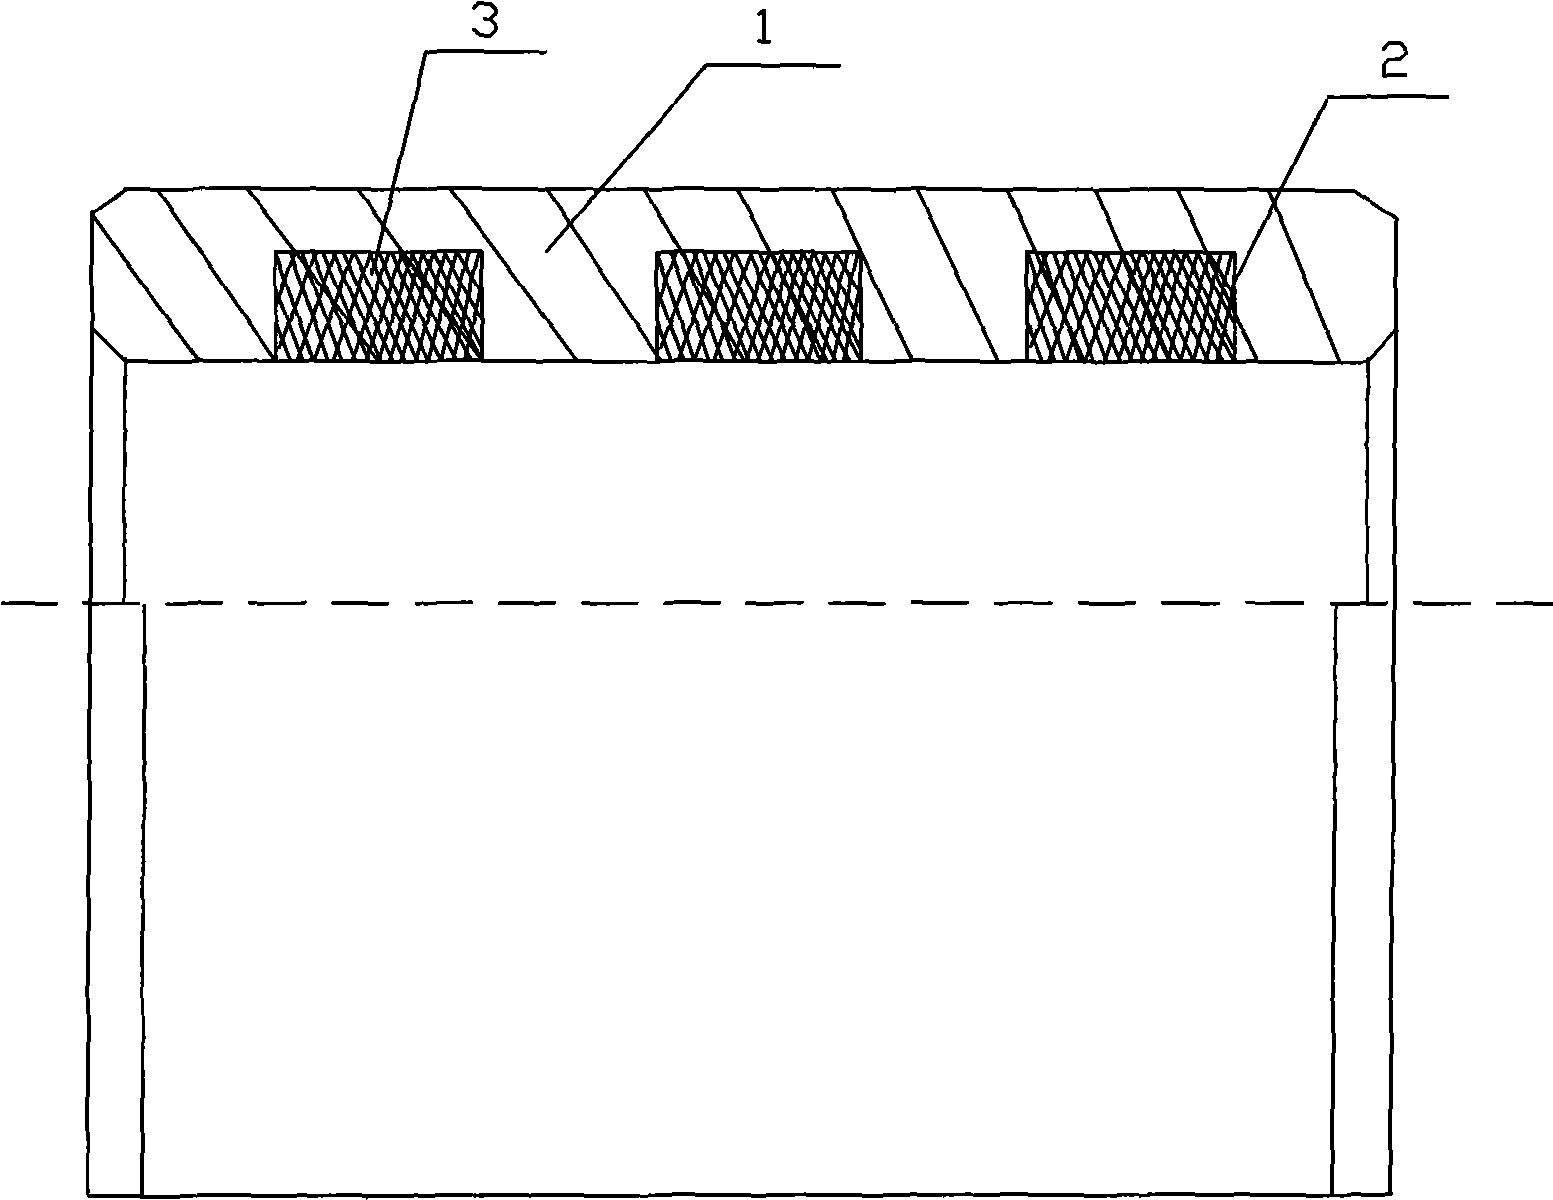 Thin wall embedded self-lubricating bearing and manufacturing method thereof